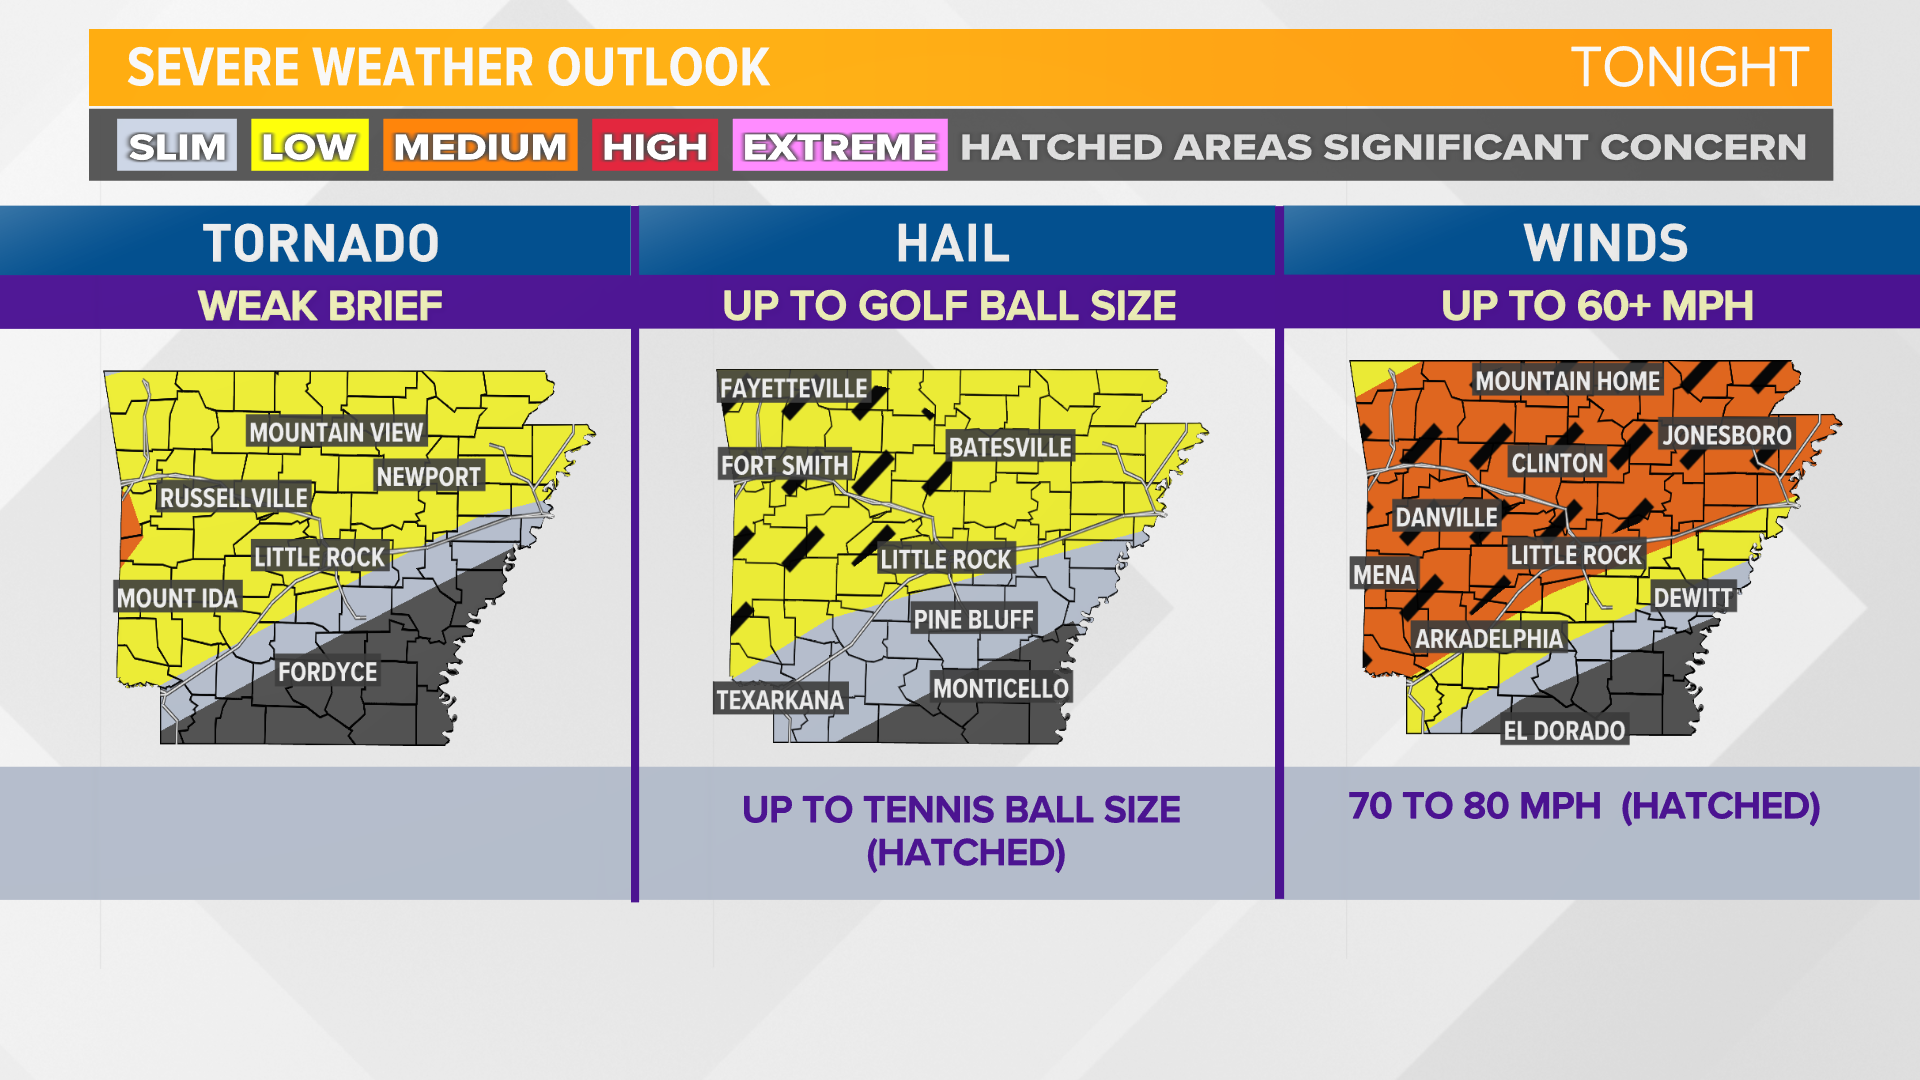 Severe weather possible across Arkansas Monday, Tuesday